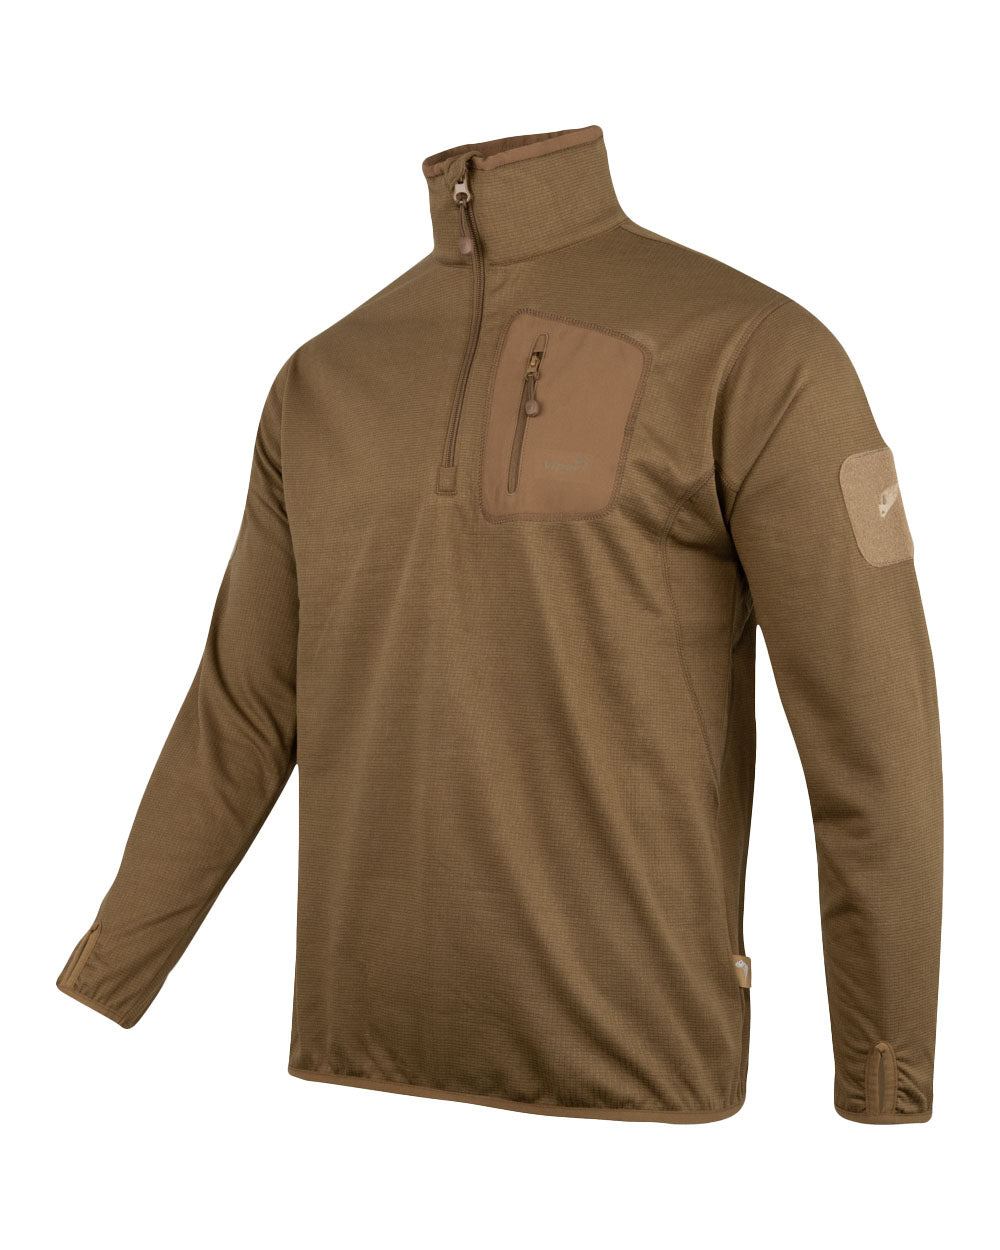 Coyote coloured Viper Tech Mid Layer Fleece Top on White background 